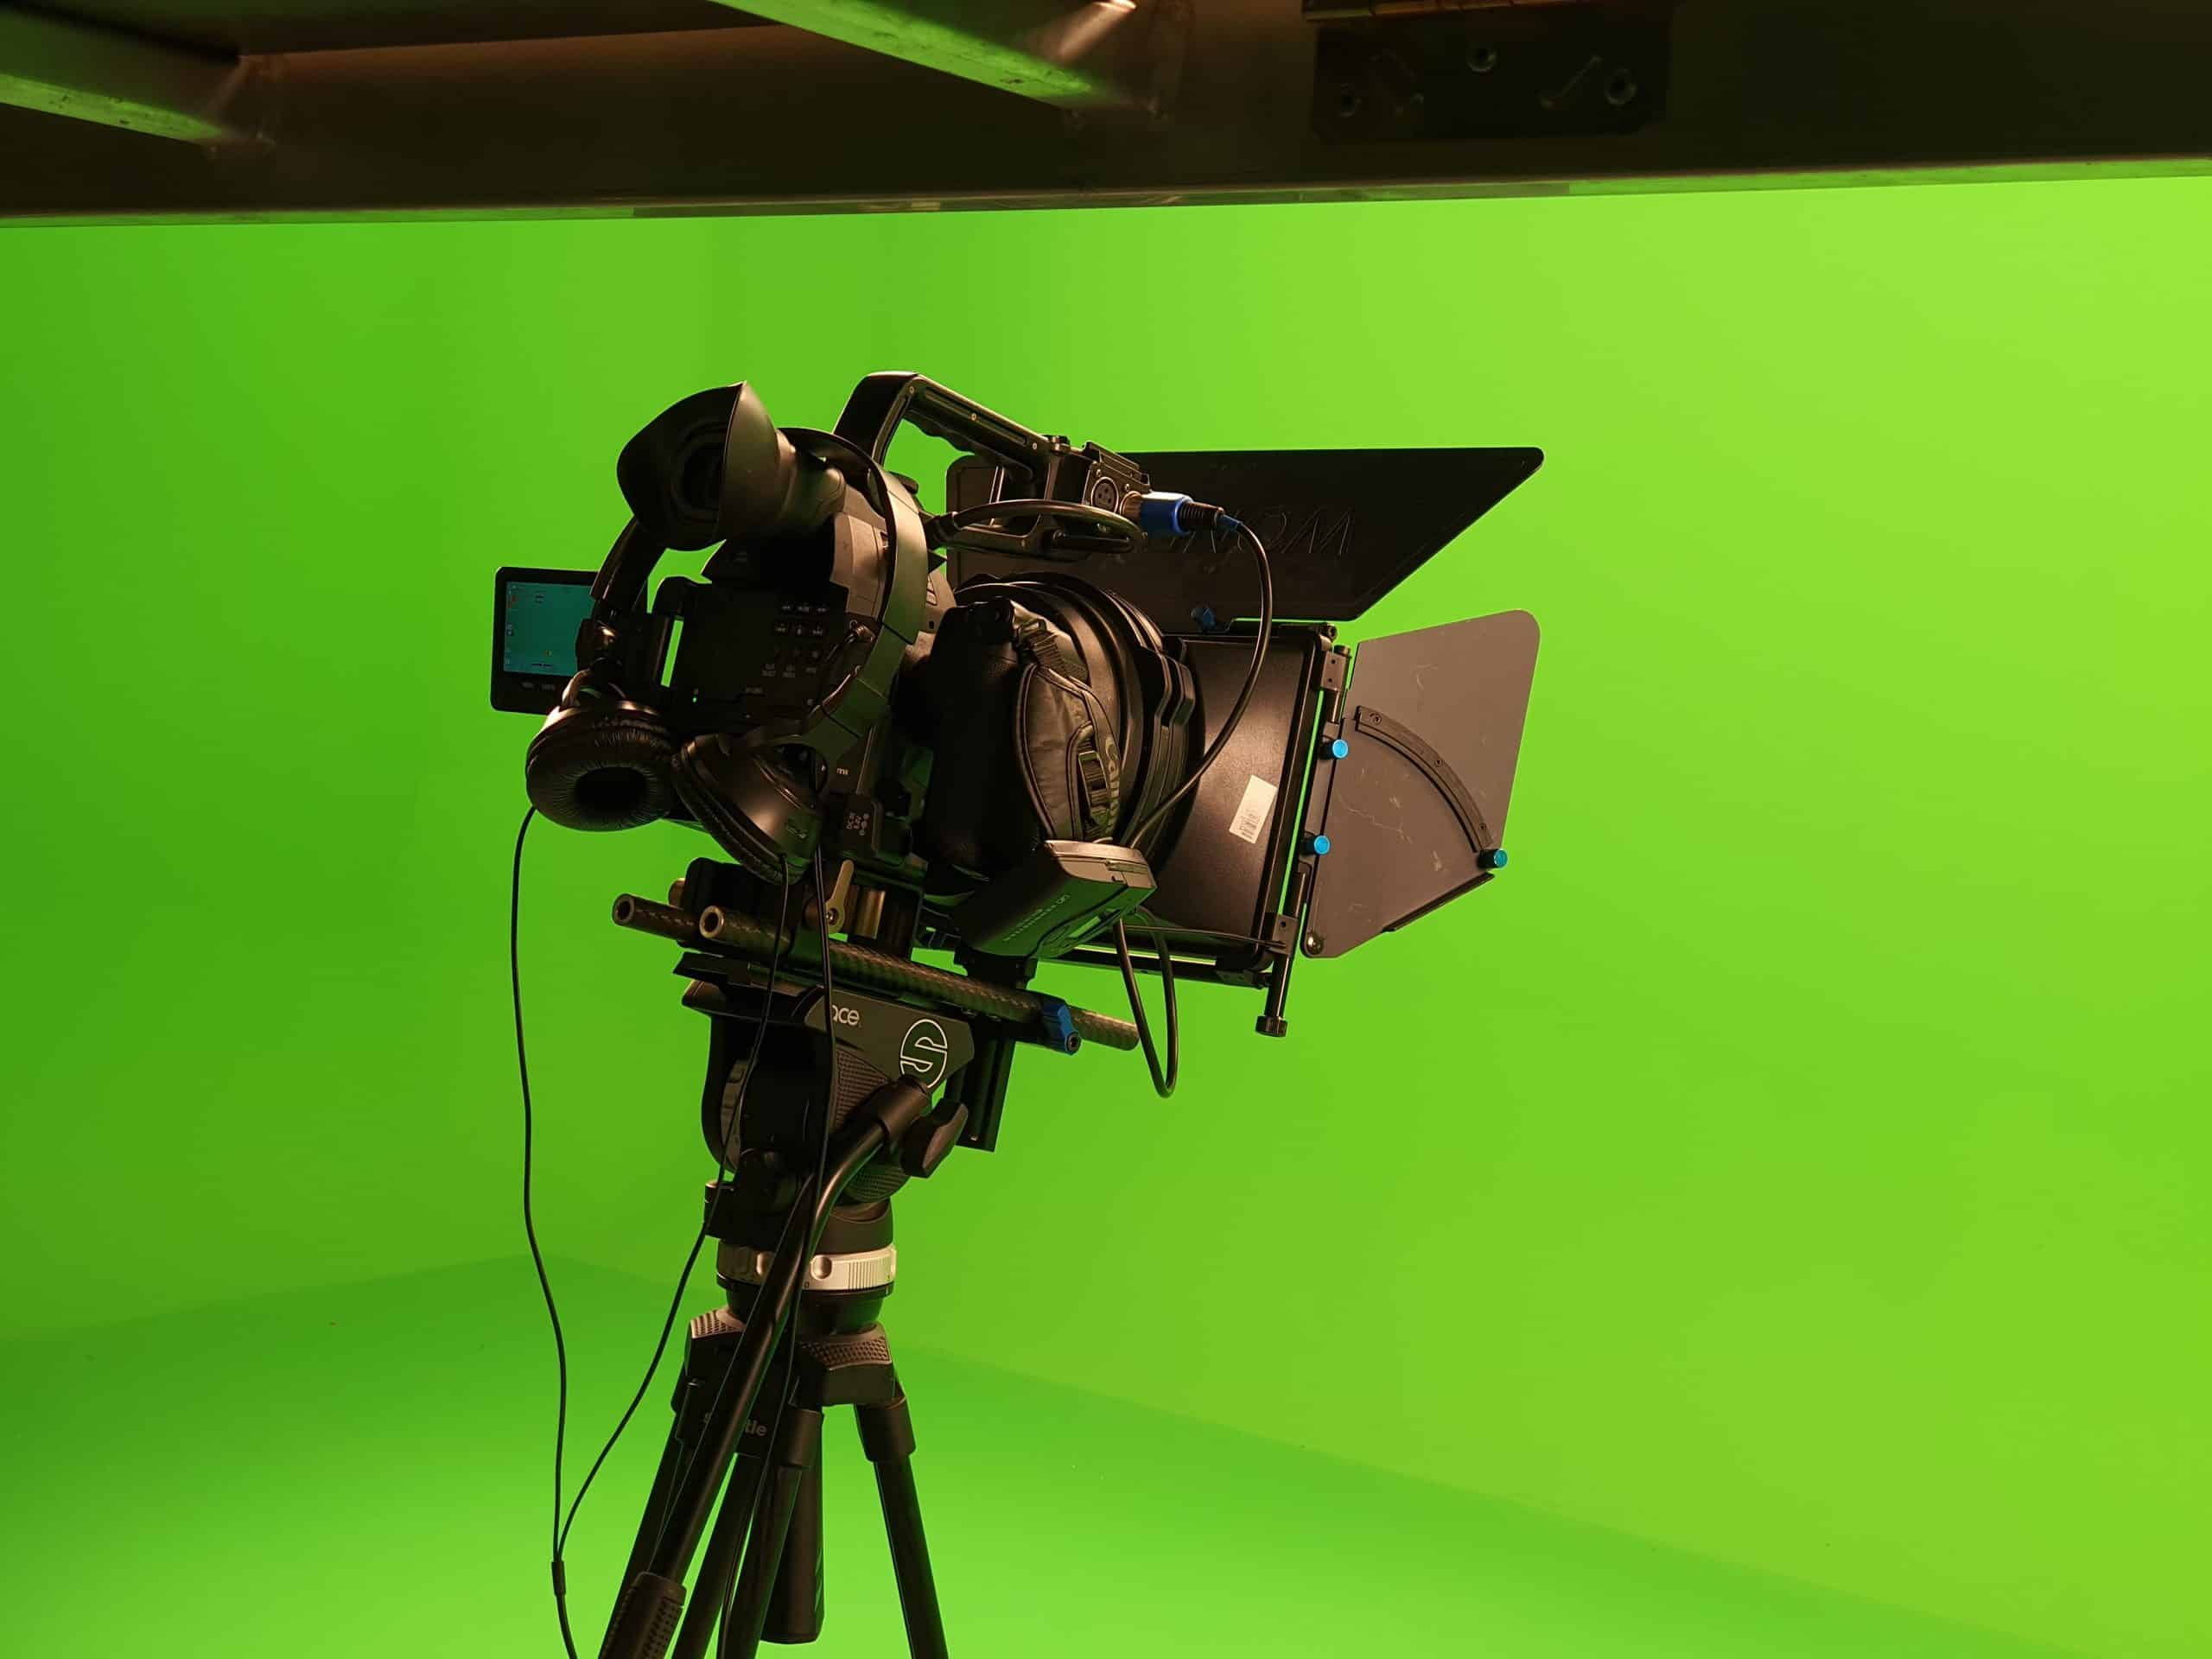 Tips for using a green screen studio